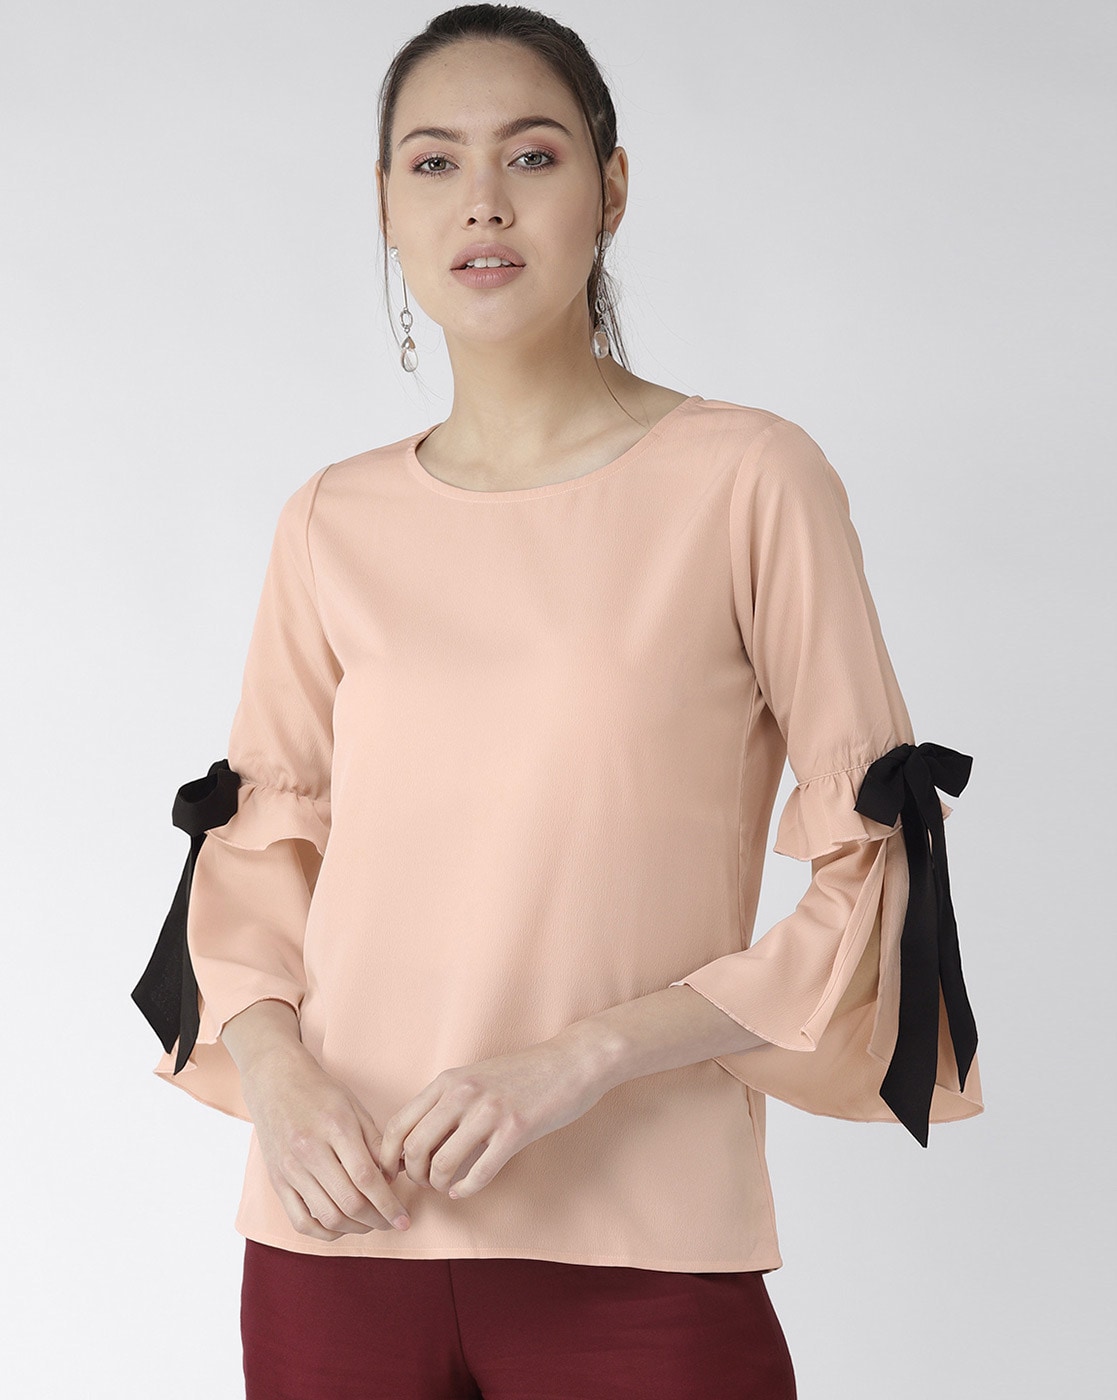 Buy Nude Tops for Women by STYLE QUOTIENT Online